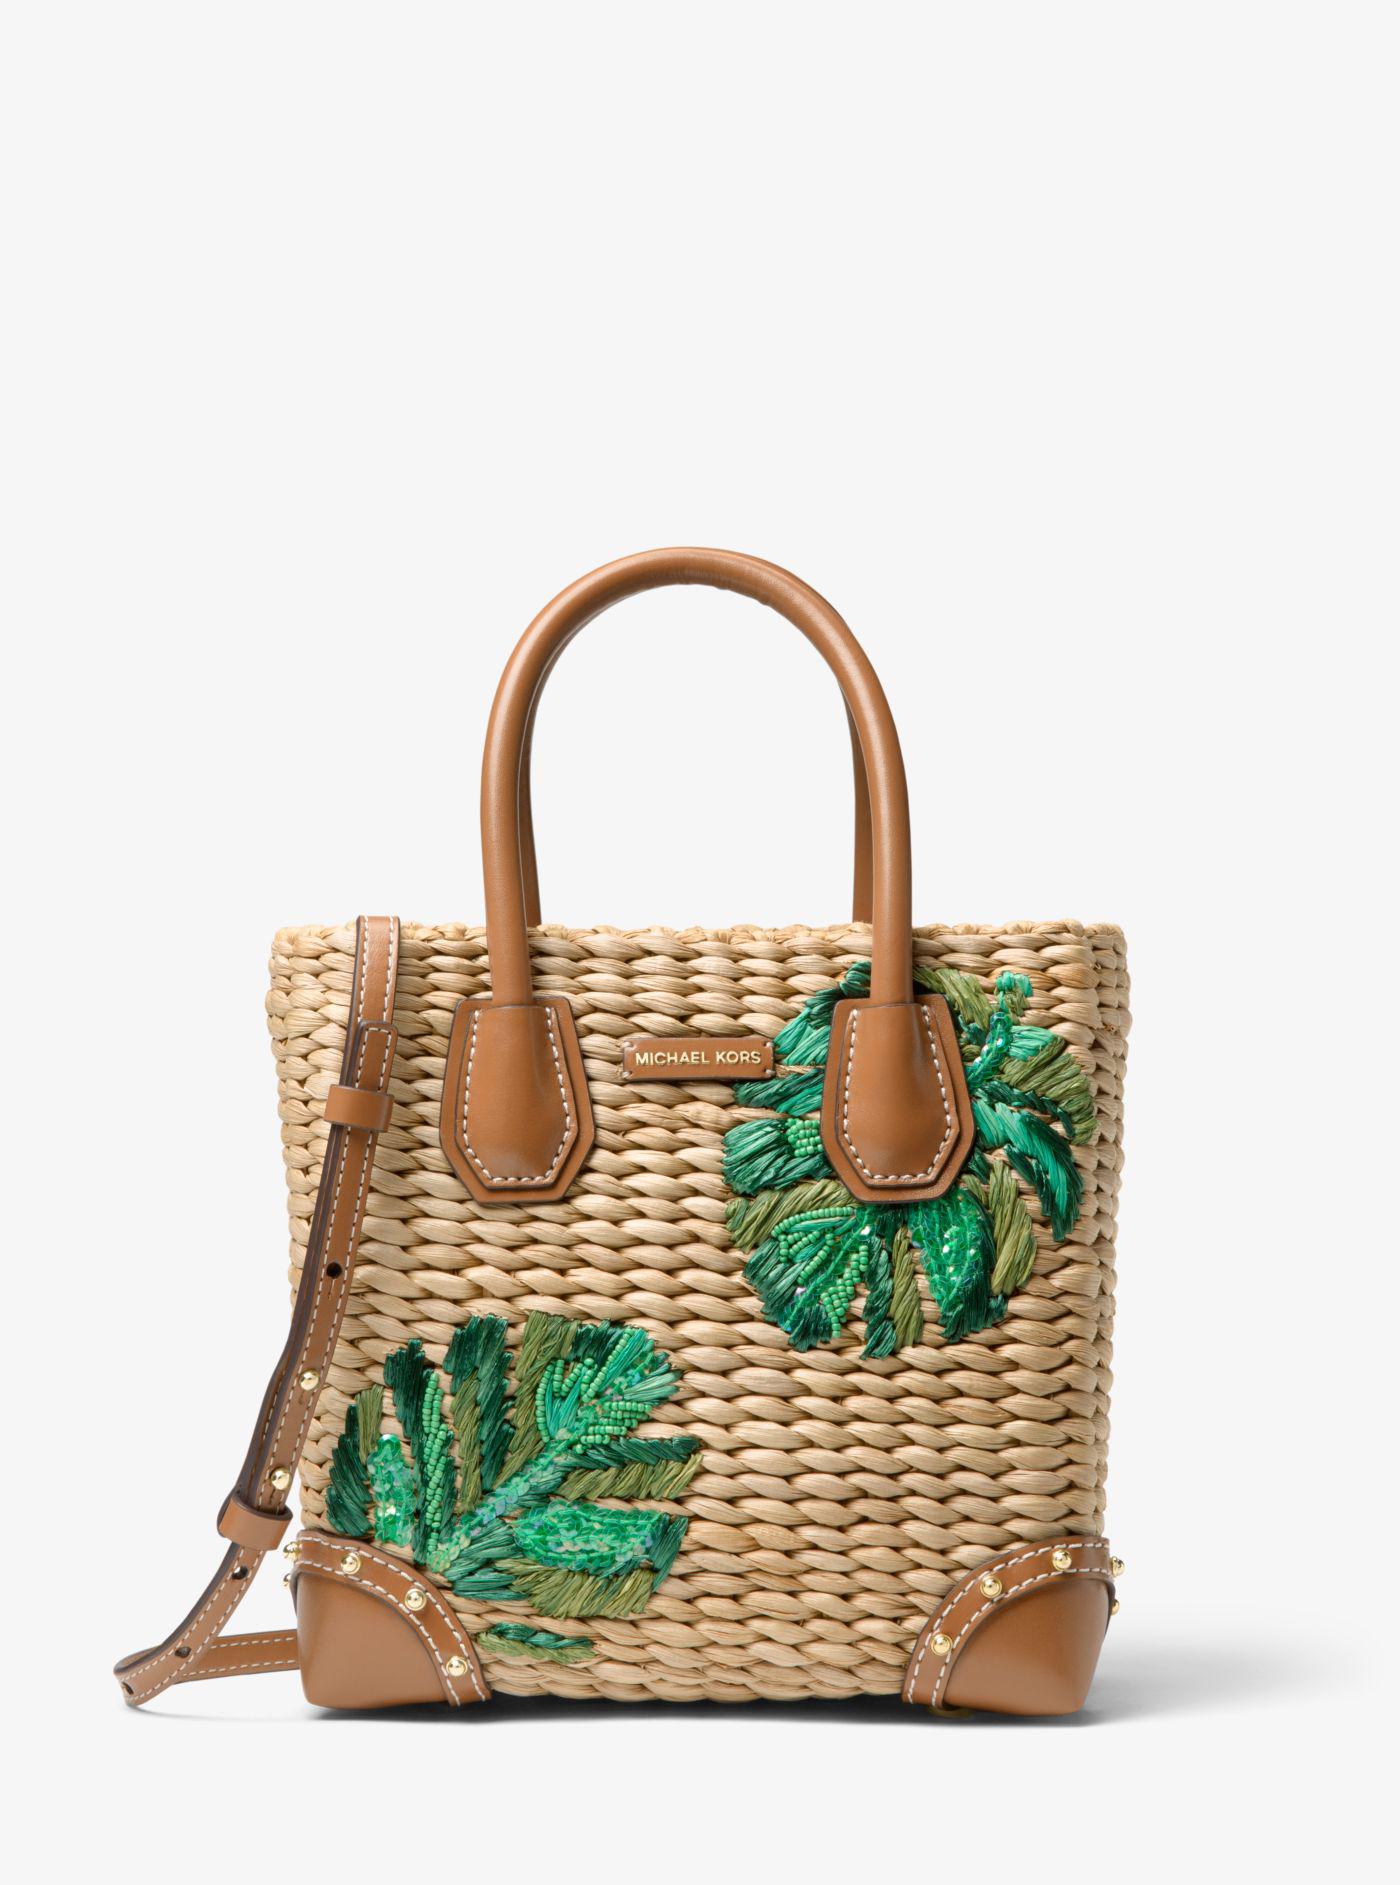 Top 81+ michael kors straw bags latest - in.cdgdbentre